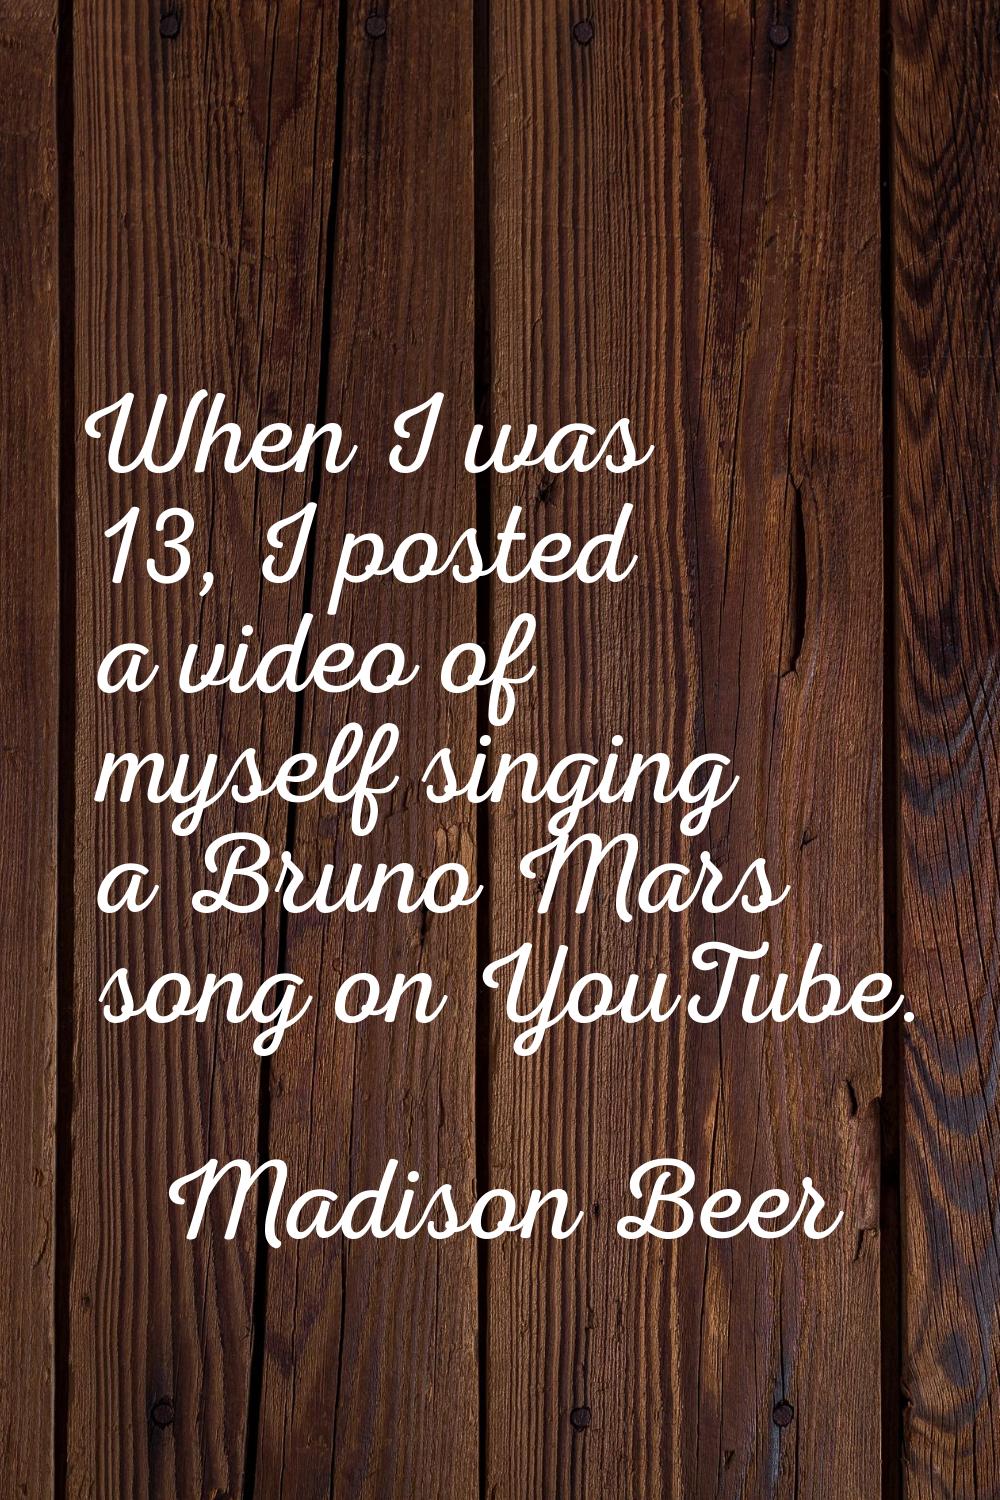 When I was 13, I posted a video of myself singing a Bruno Mars song on YouTube.